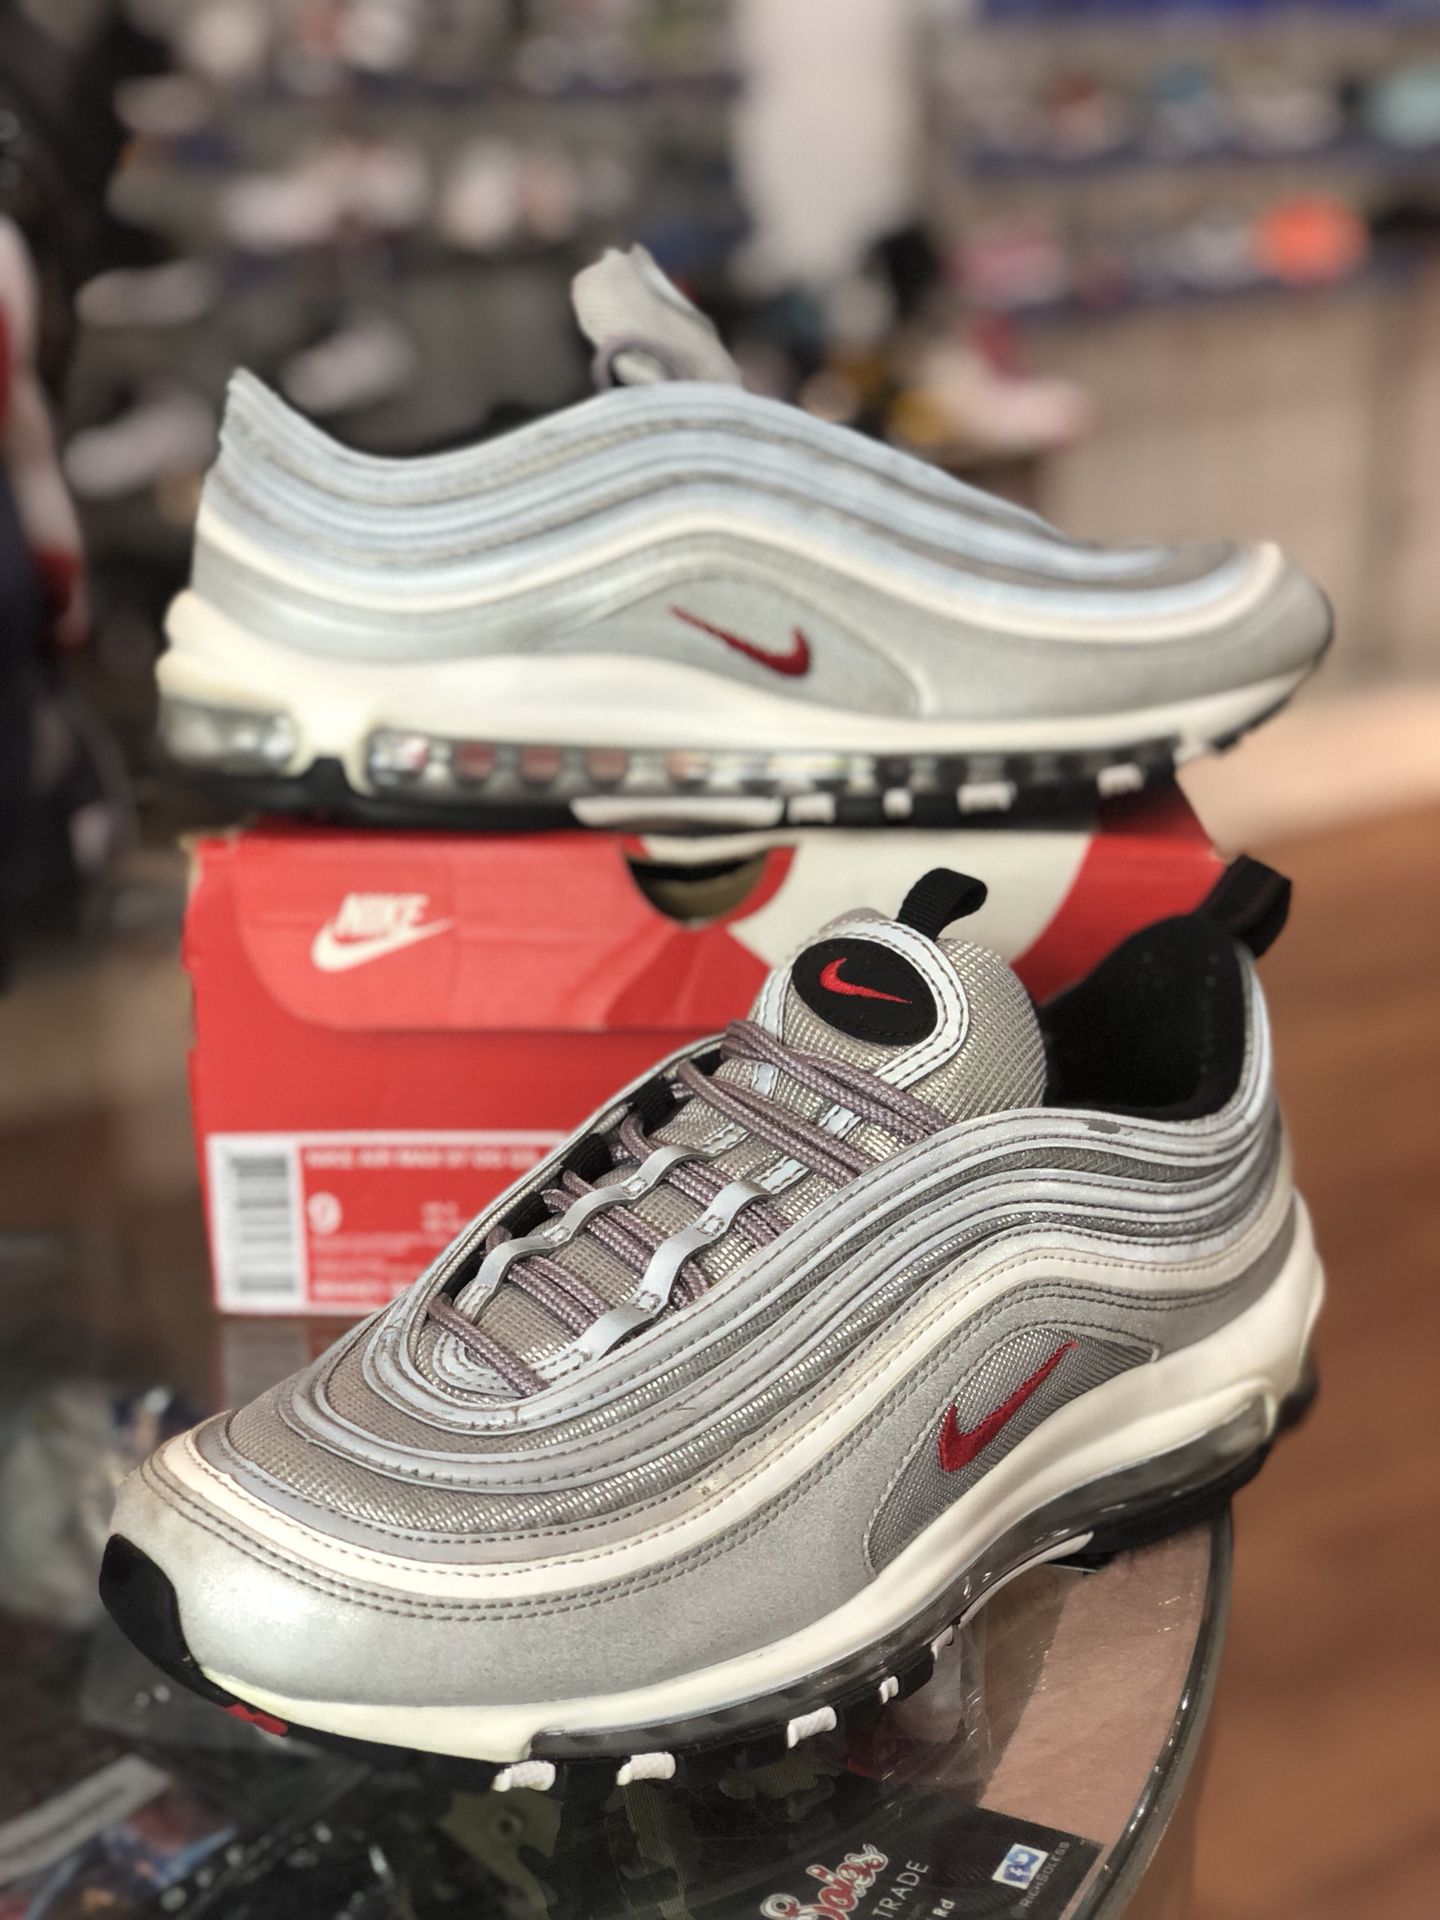 Silver bullet air max 97s size 9